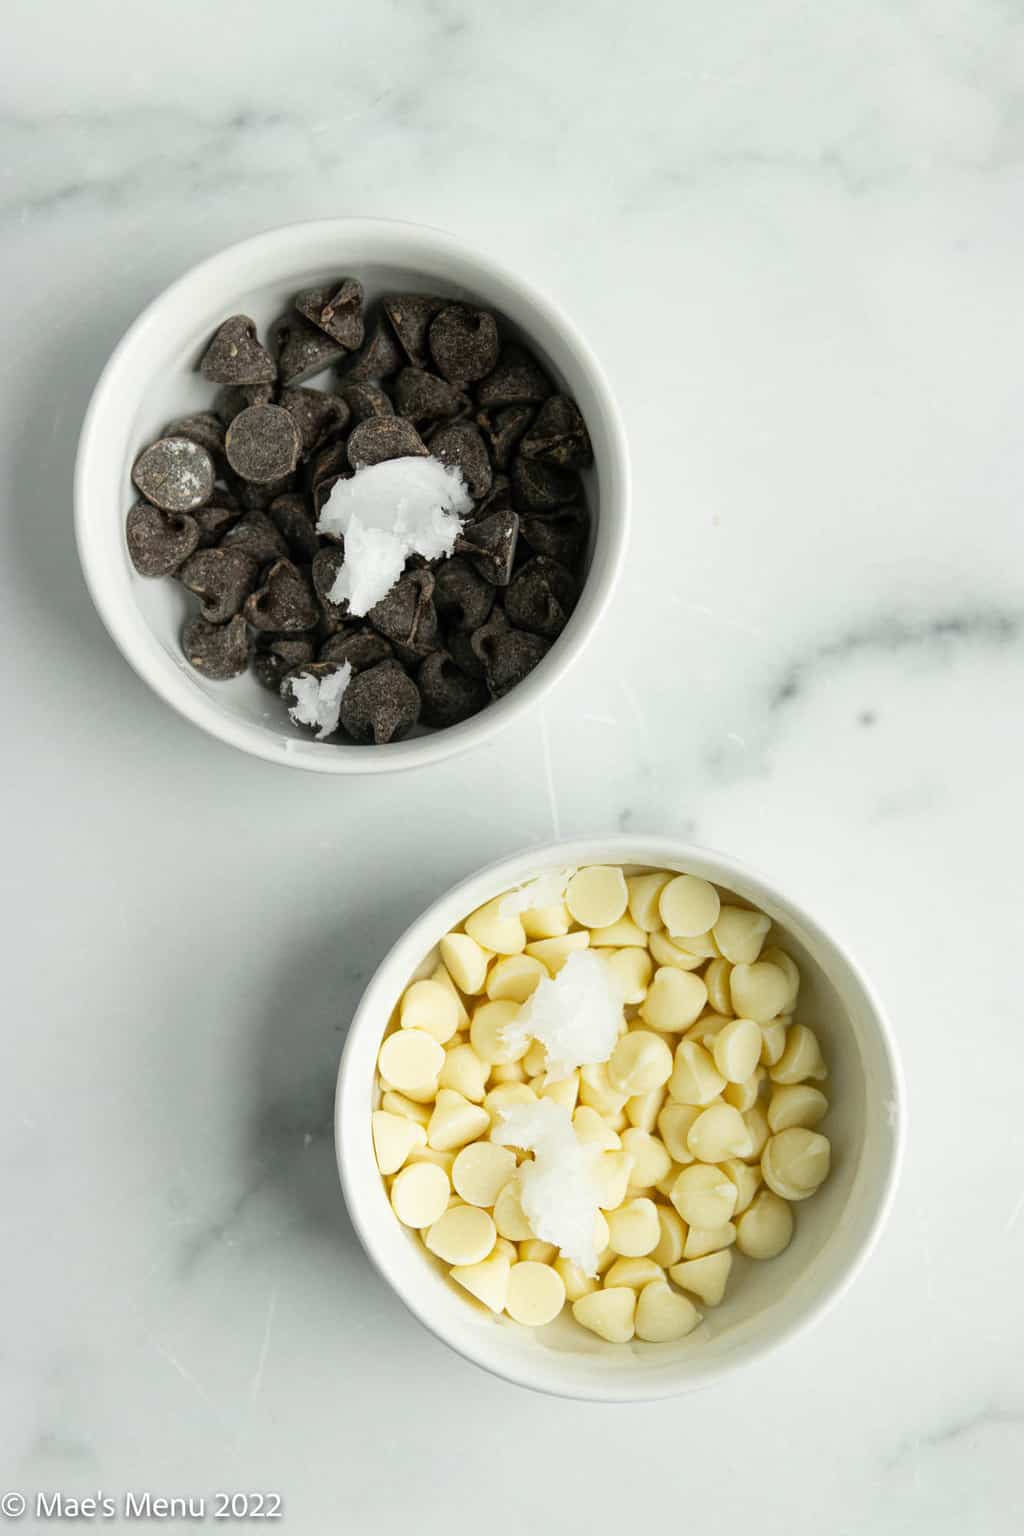 A small dish of chocolate chips and coconut oil and a small dish of white chocolate chips and coconut oil.